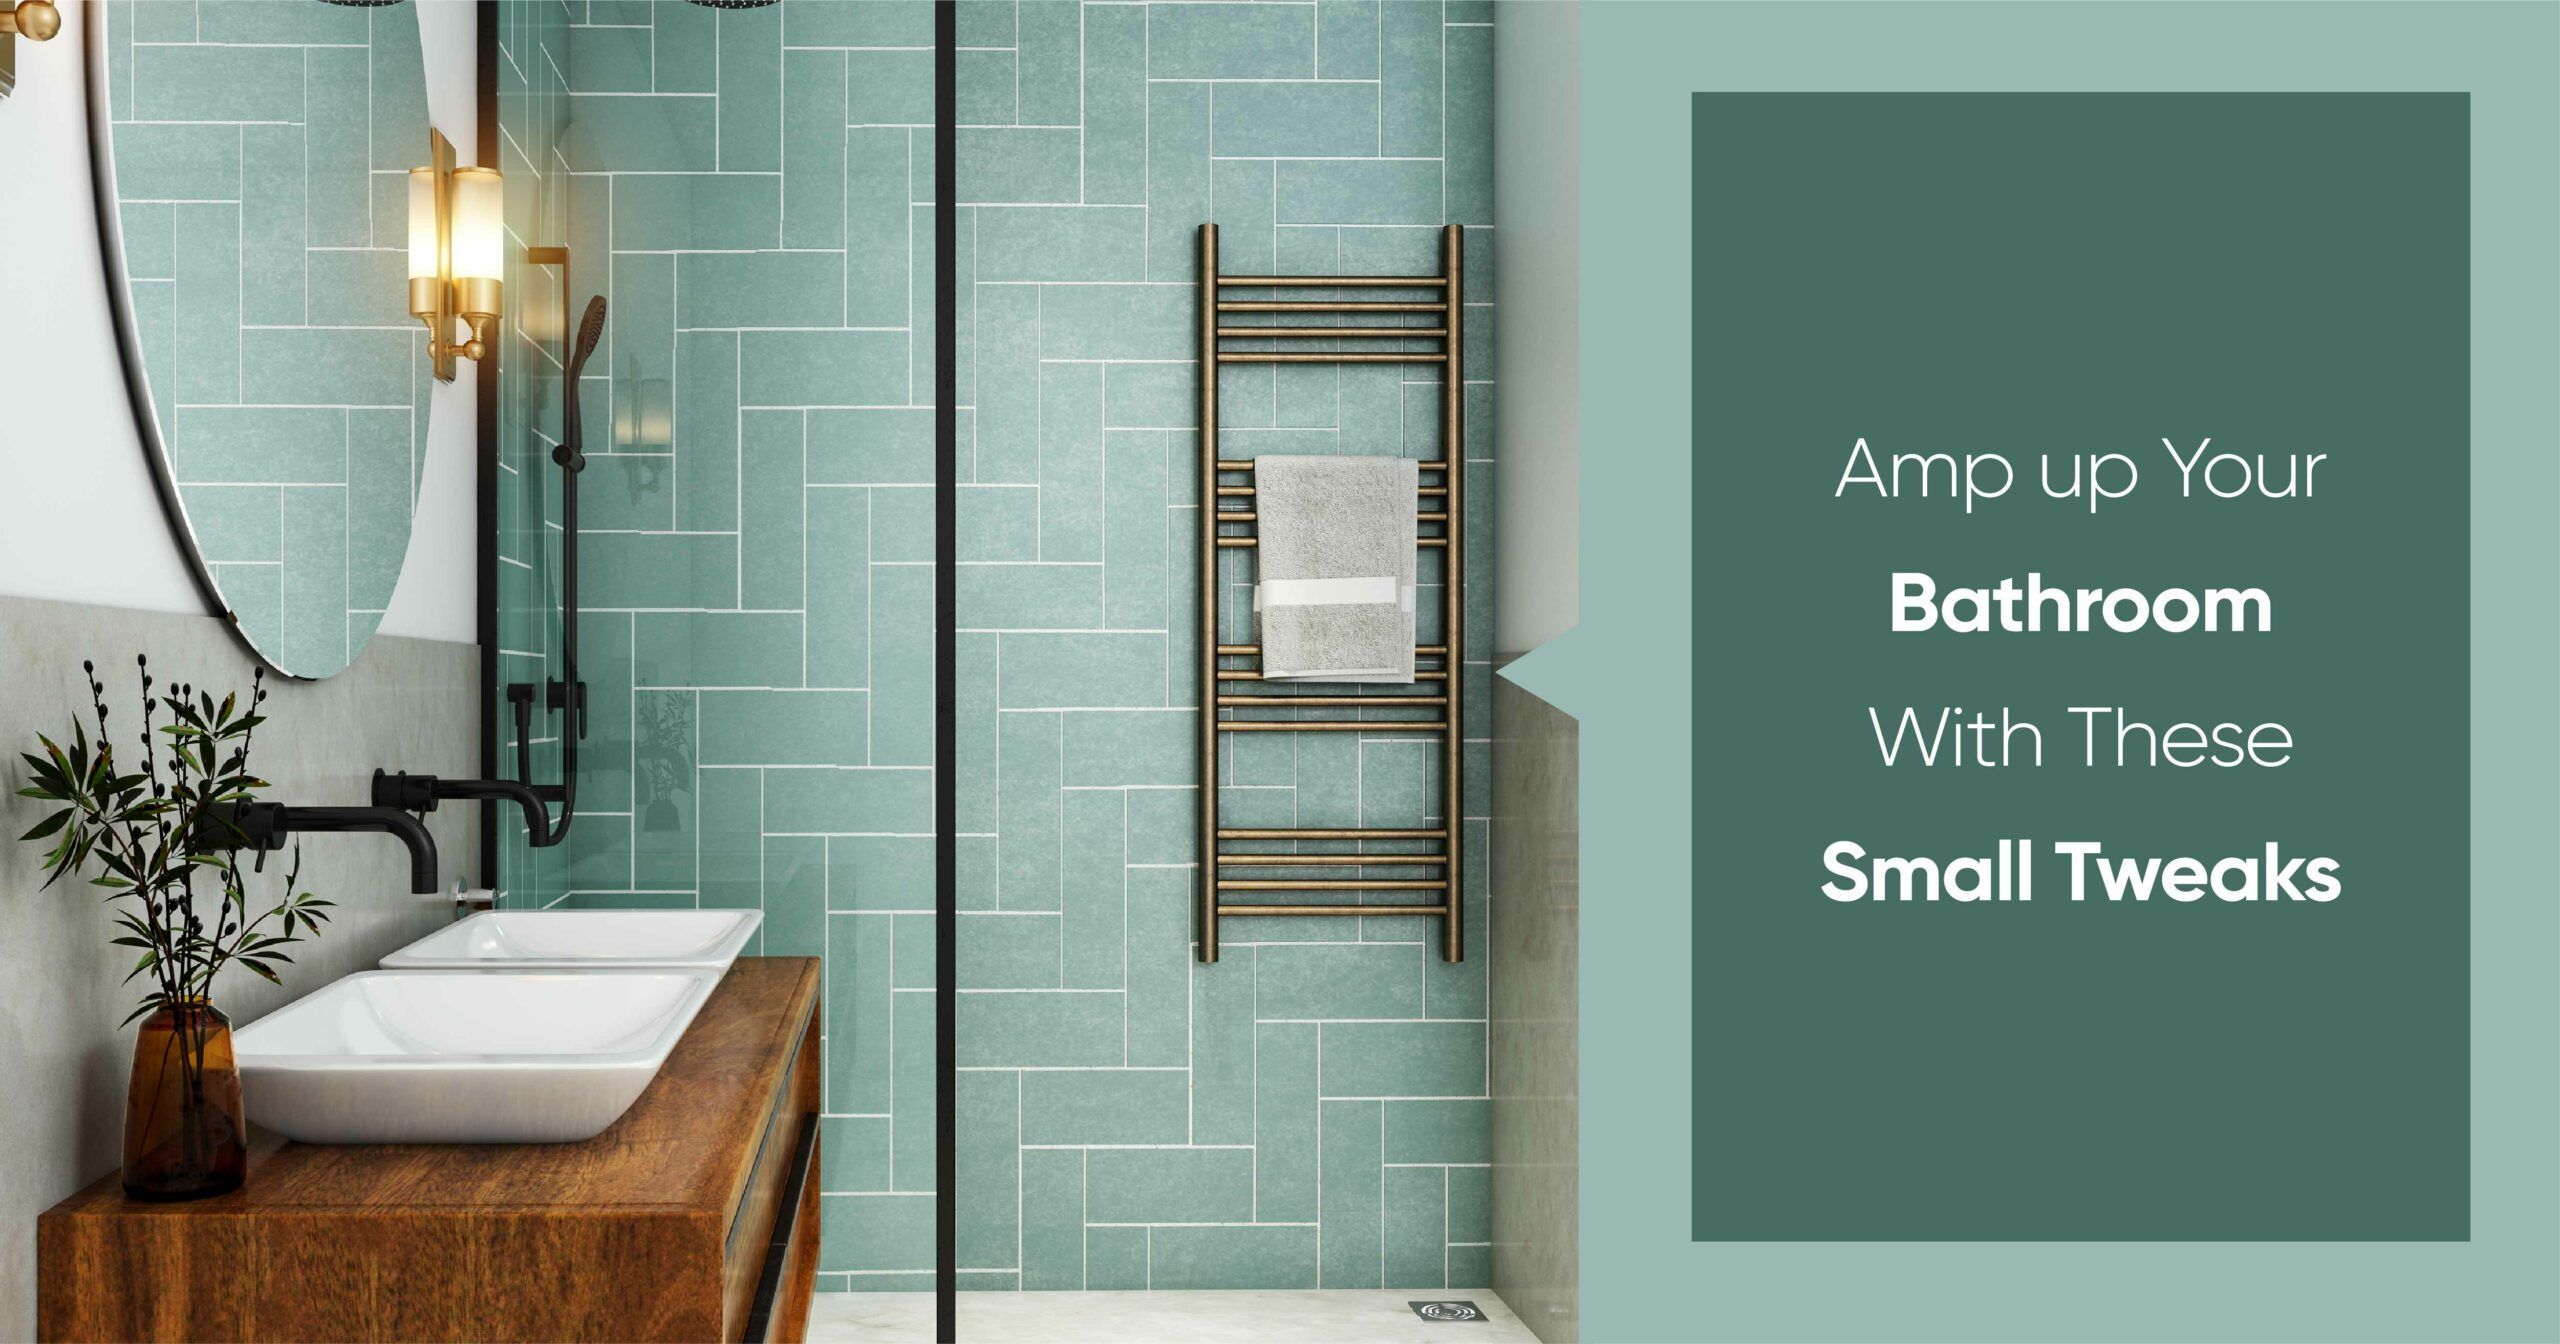 These Bathroom Decor Ideas Don’t Need a Complete Gut Job